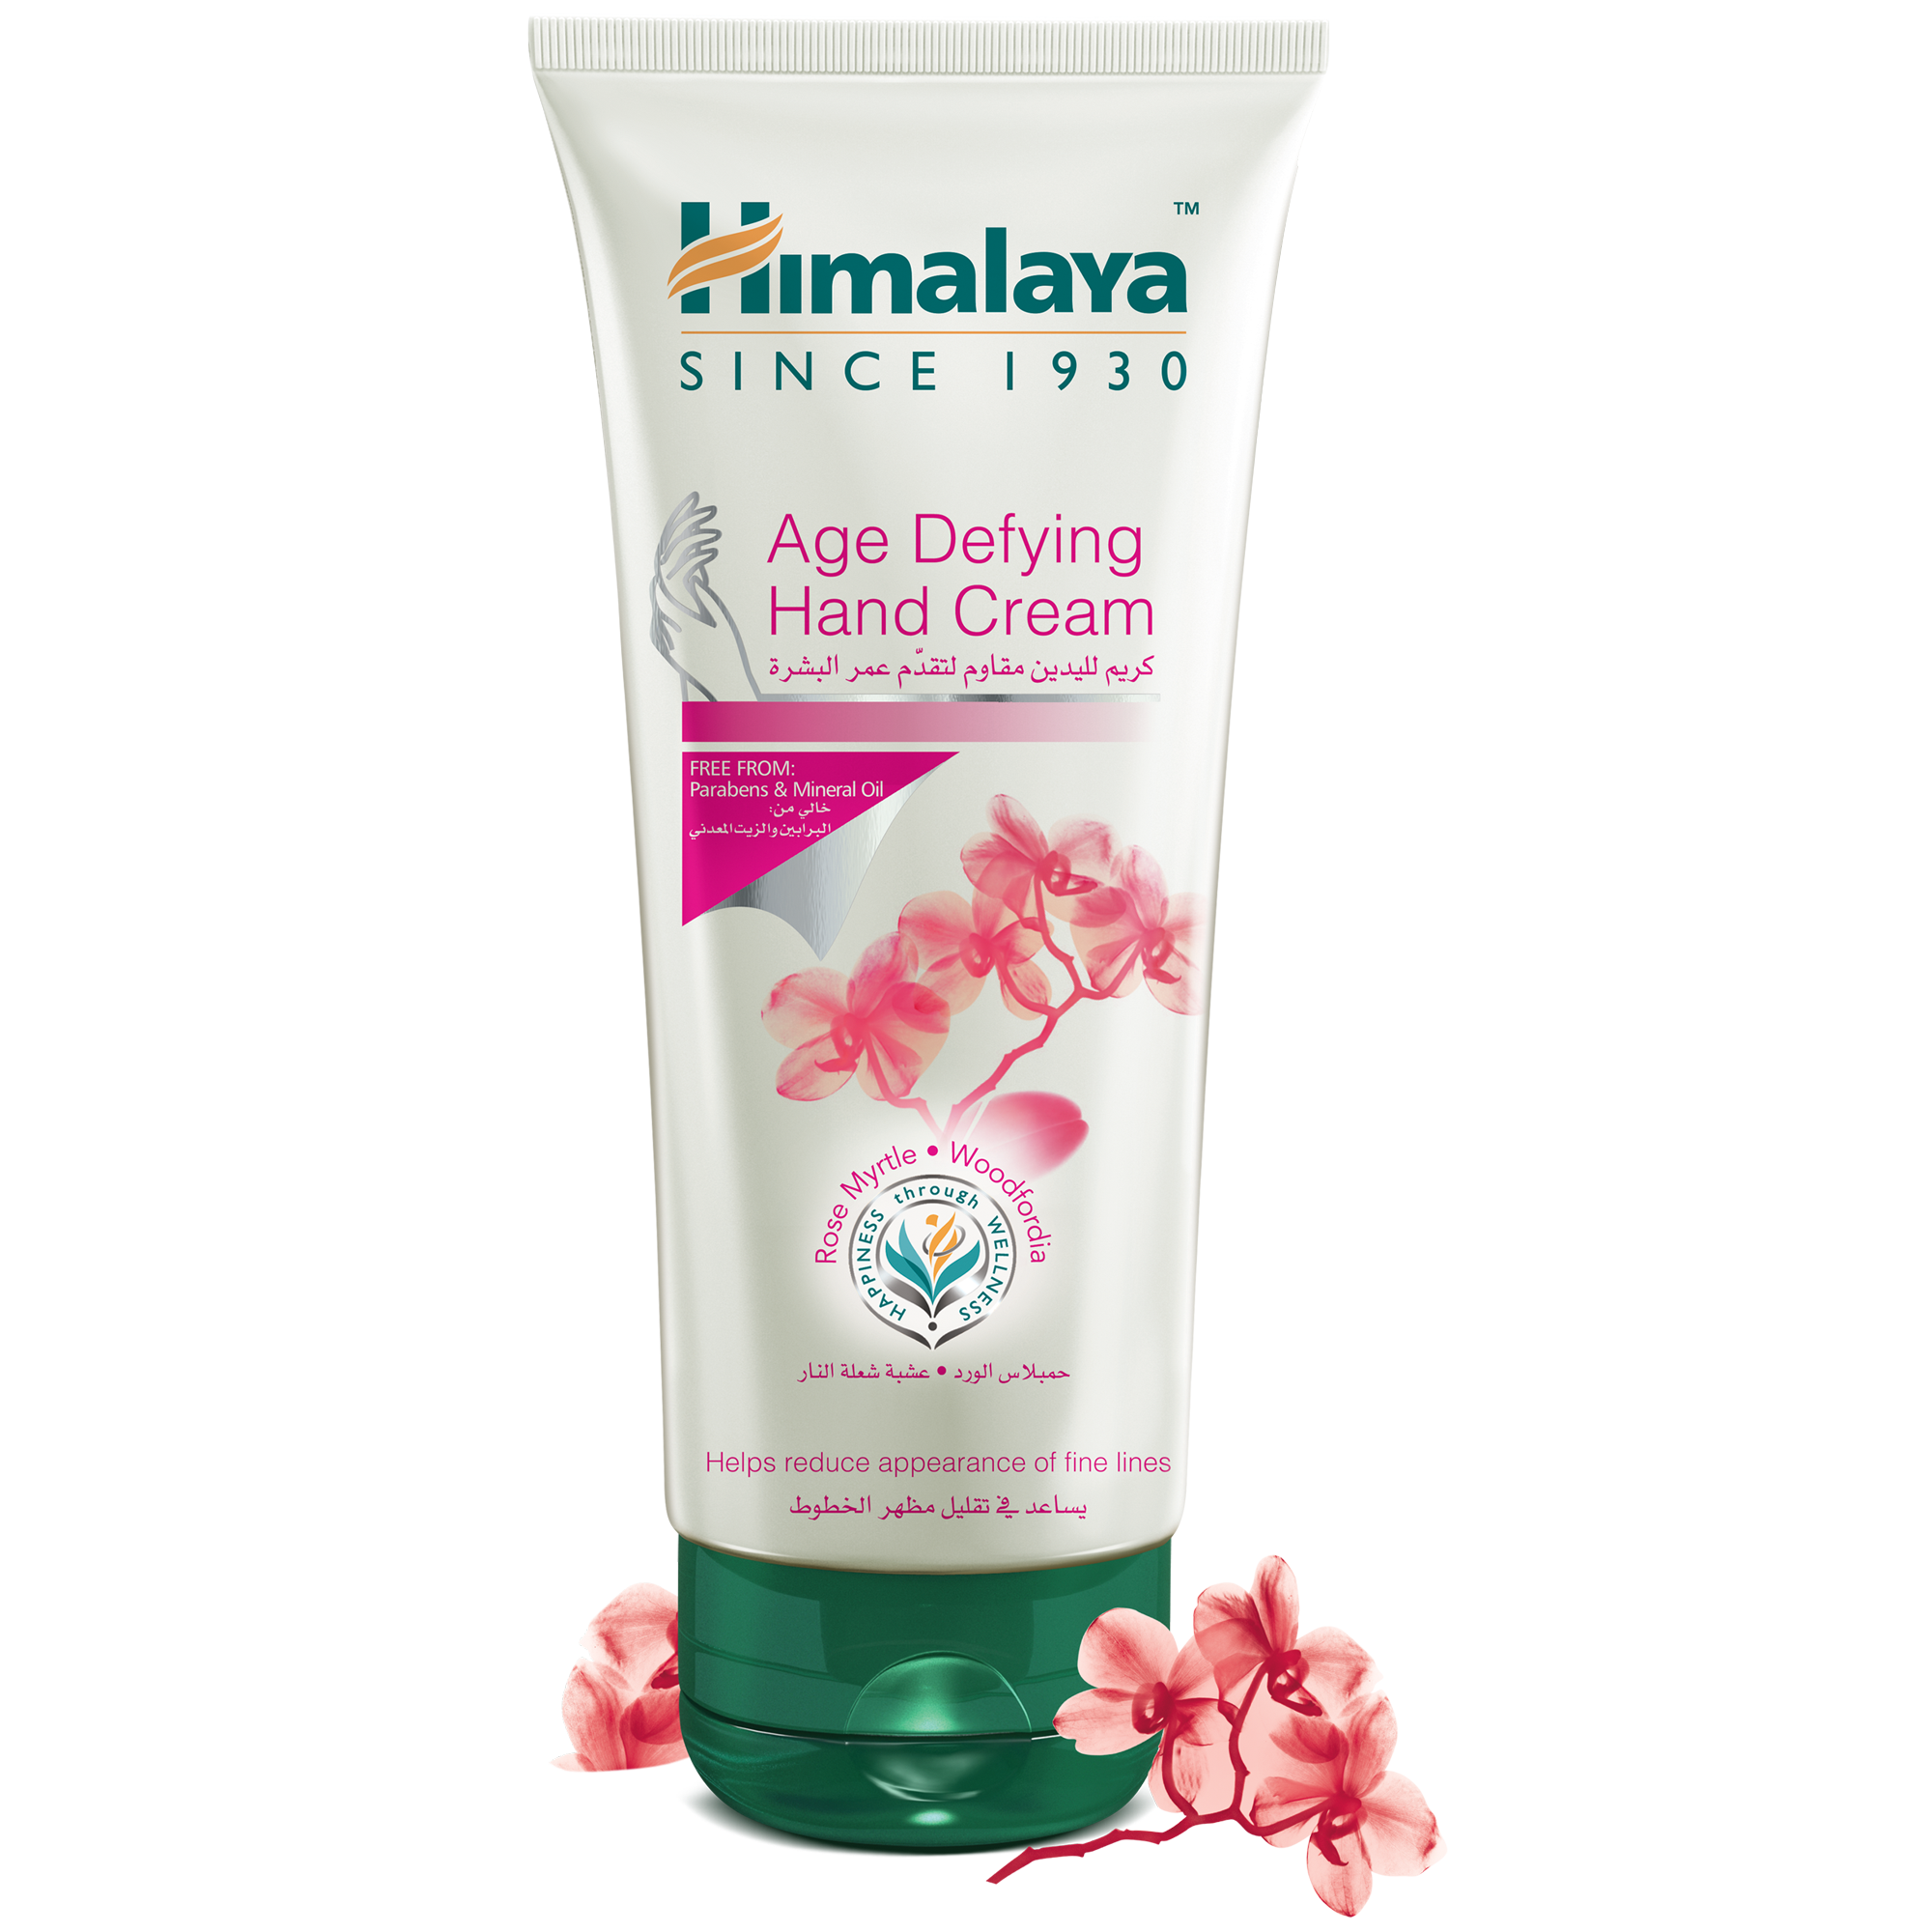 Himalaya Age Defying Hand Cream 100ml - Repairs & Protects for Youthful Hands